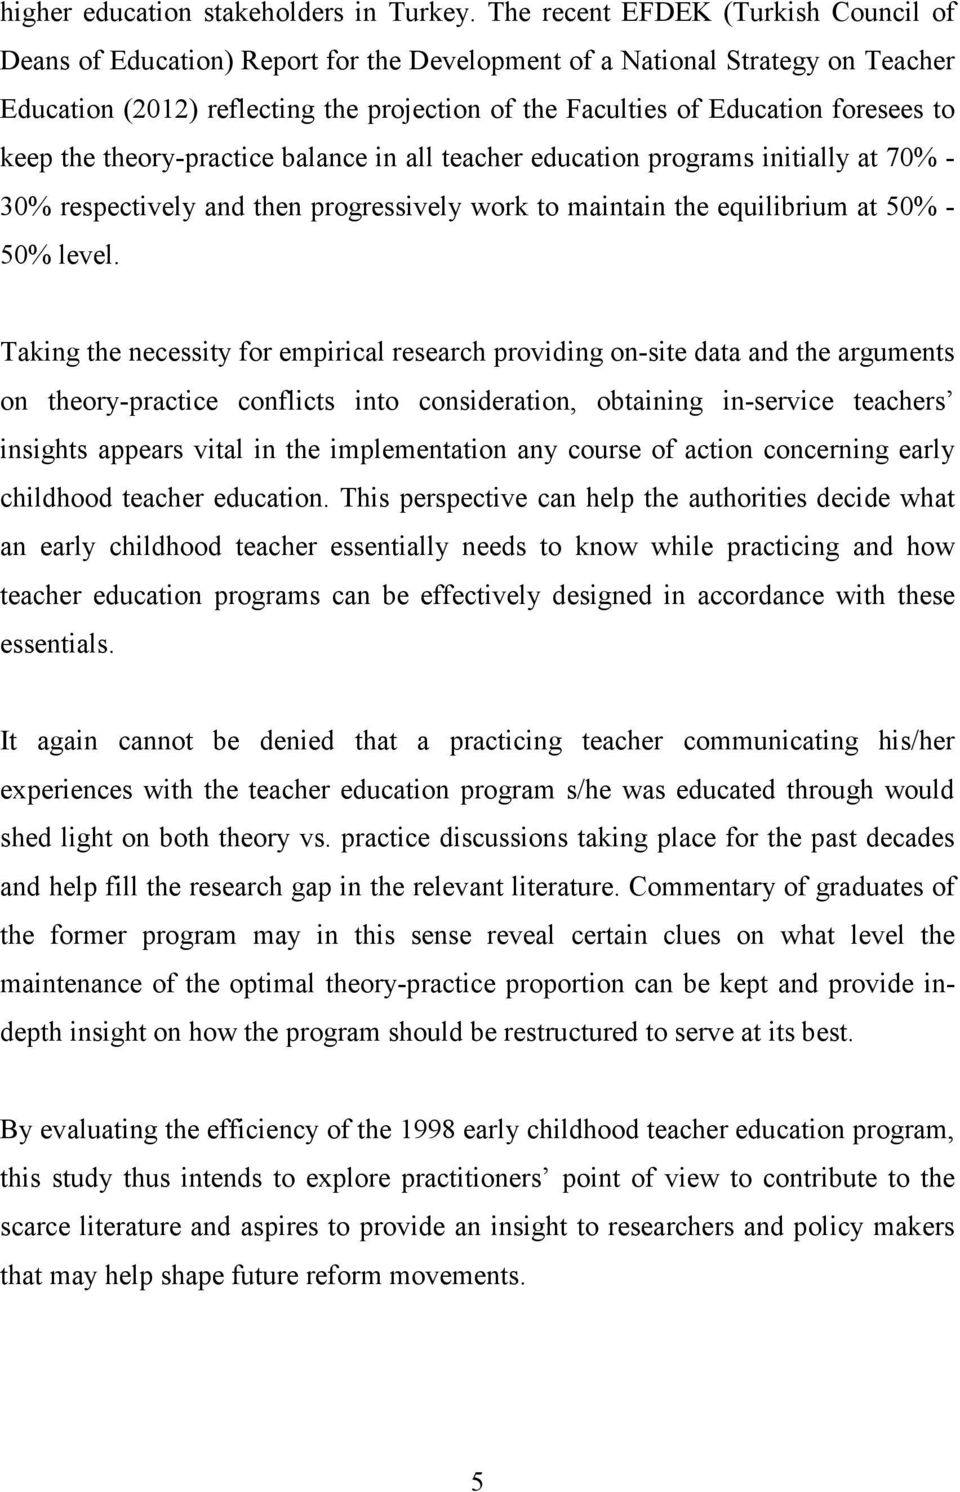 to keep the theory-practice balance in all teacher education programs initially at 70% - 30% respectively and then progressively work to maintain the equilibrium at 50% - 50% level.